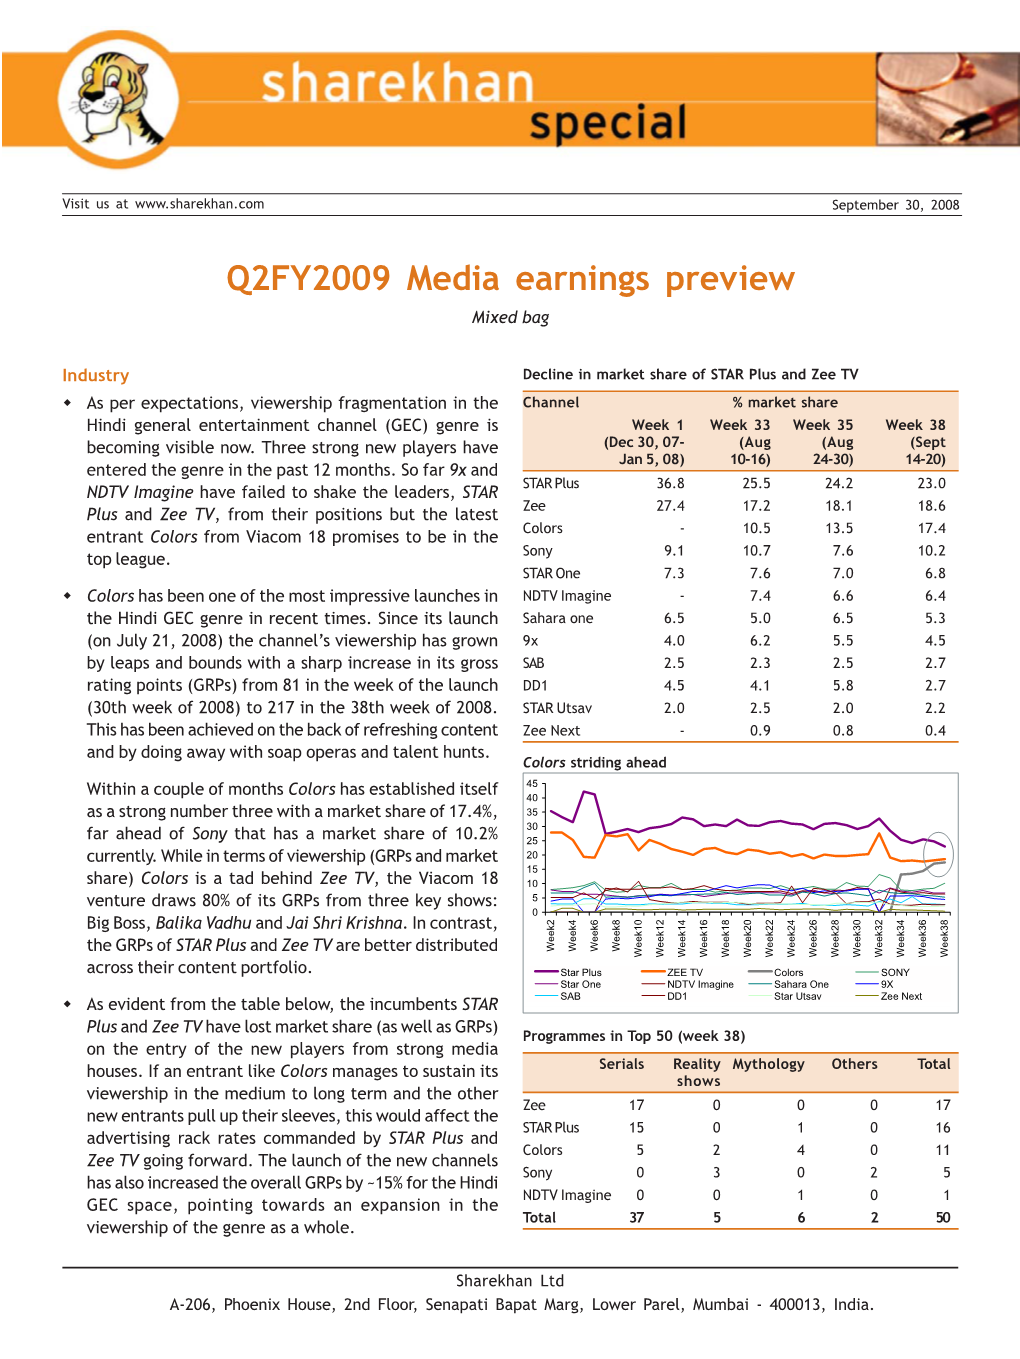 Q2FY2009 Media Earnings Preview Mixed Bag